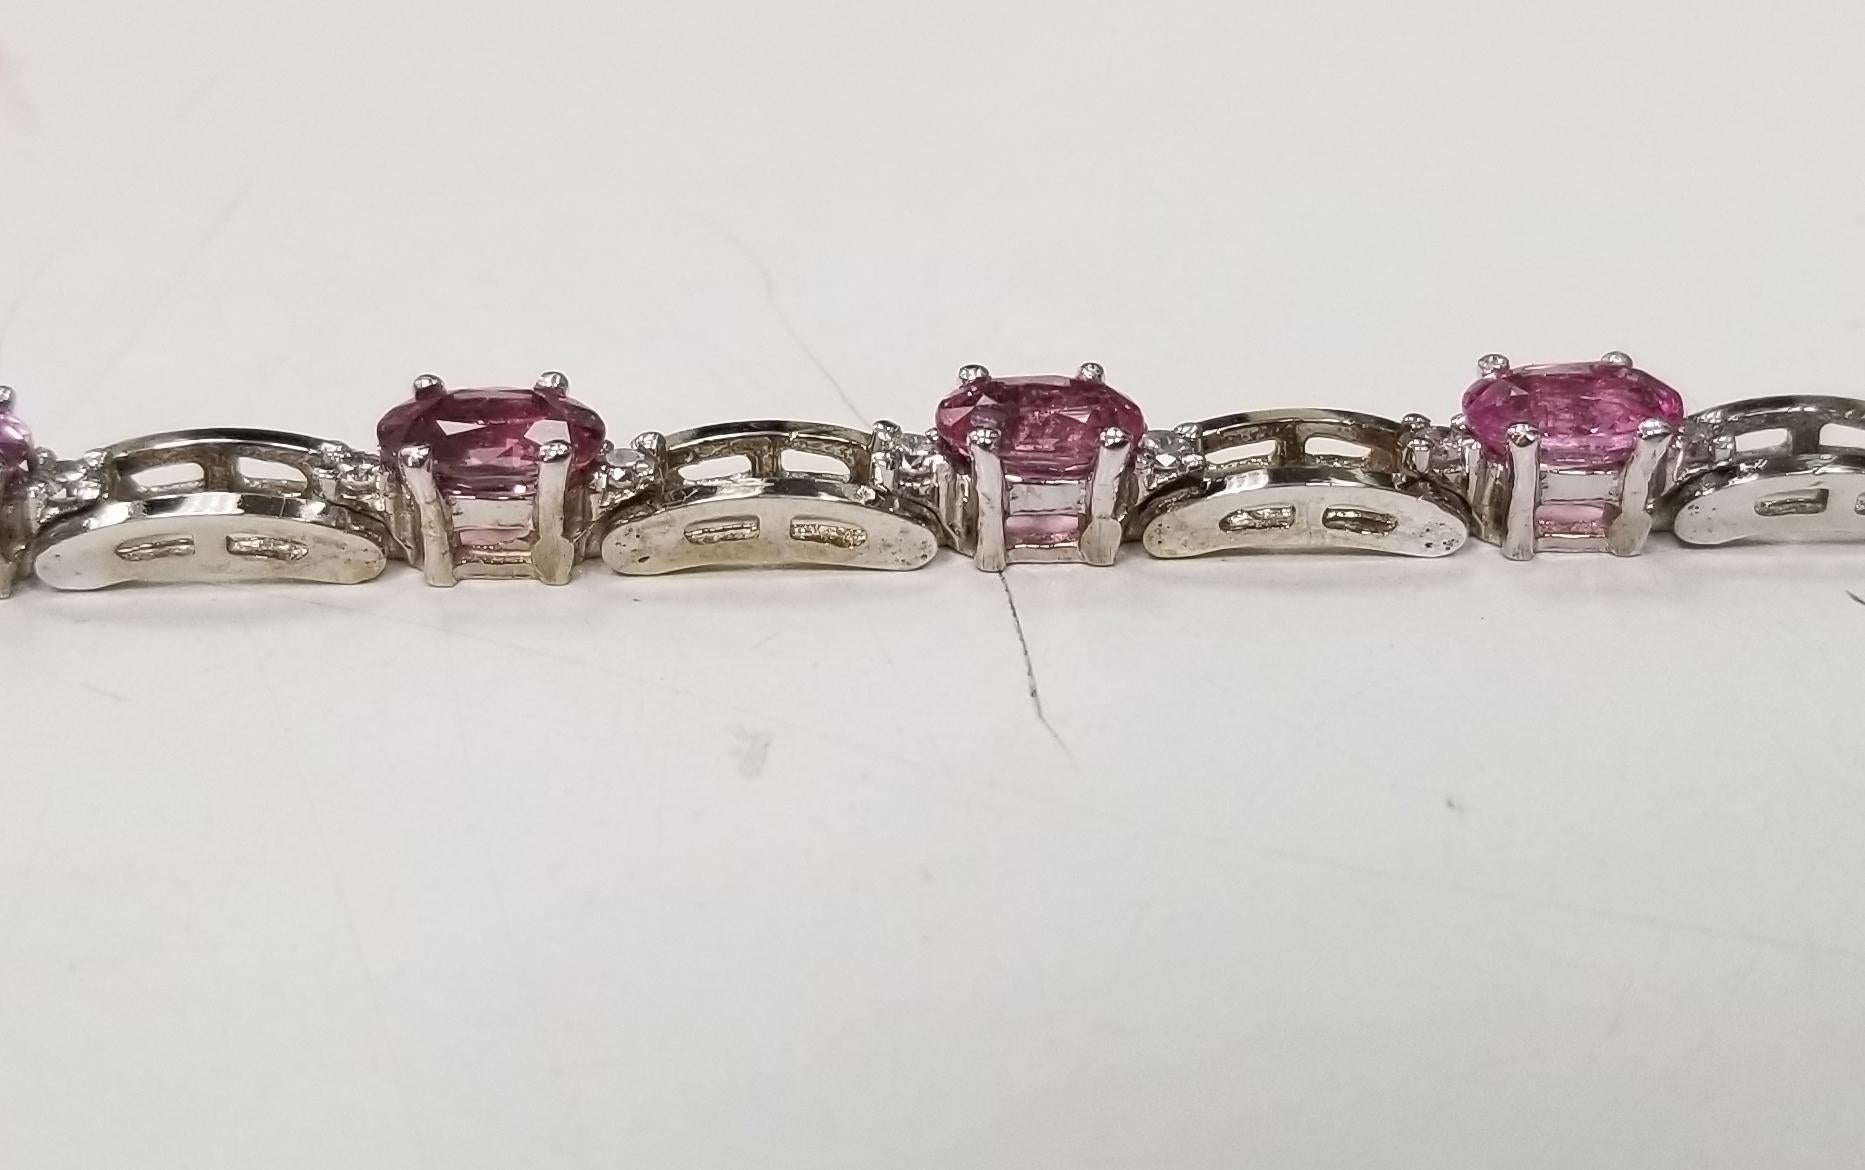 14k white gold pink tourmaline and diamond bracelet, containing 11 oval cut pink tourmaline of gem quality weighing 6.15cts. and 22 round full cut diamonds; color 